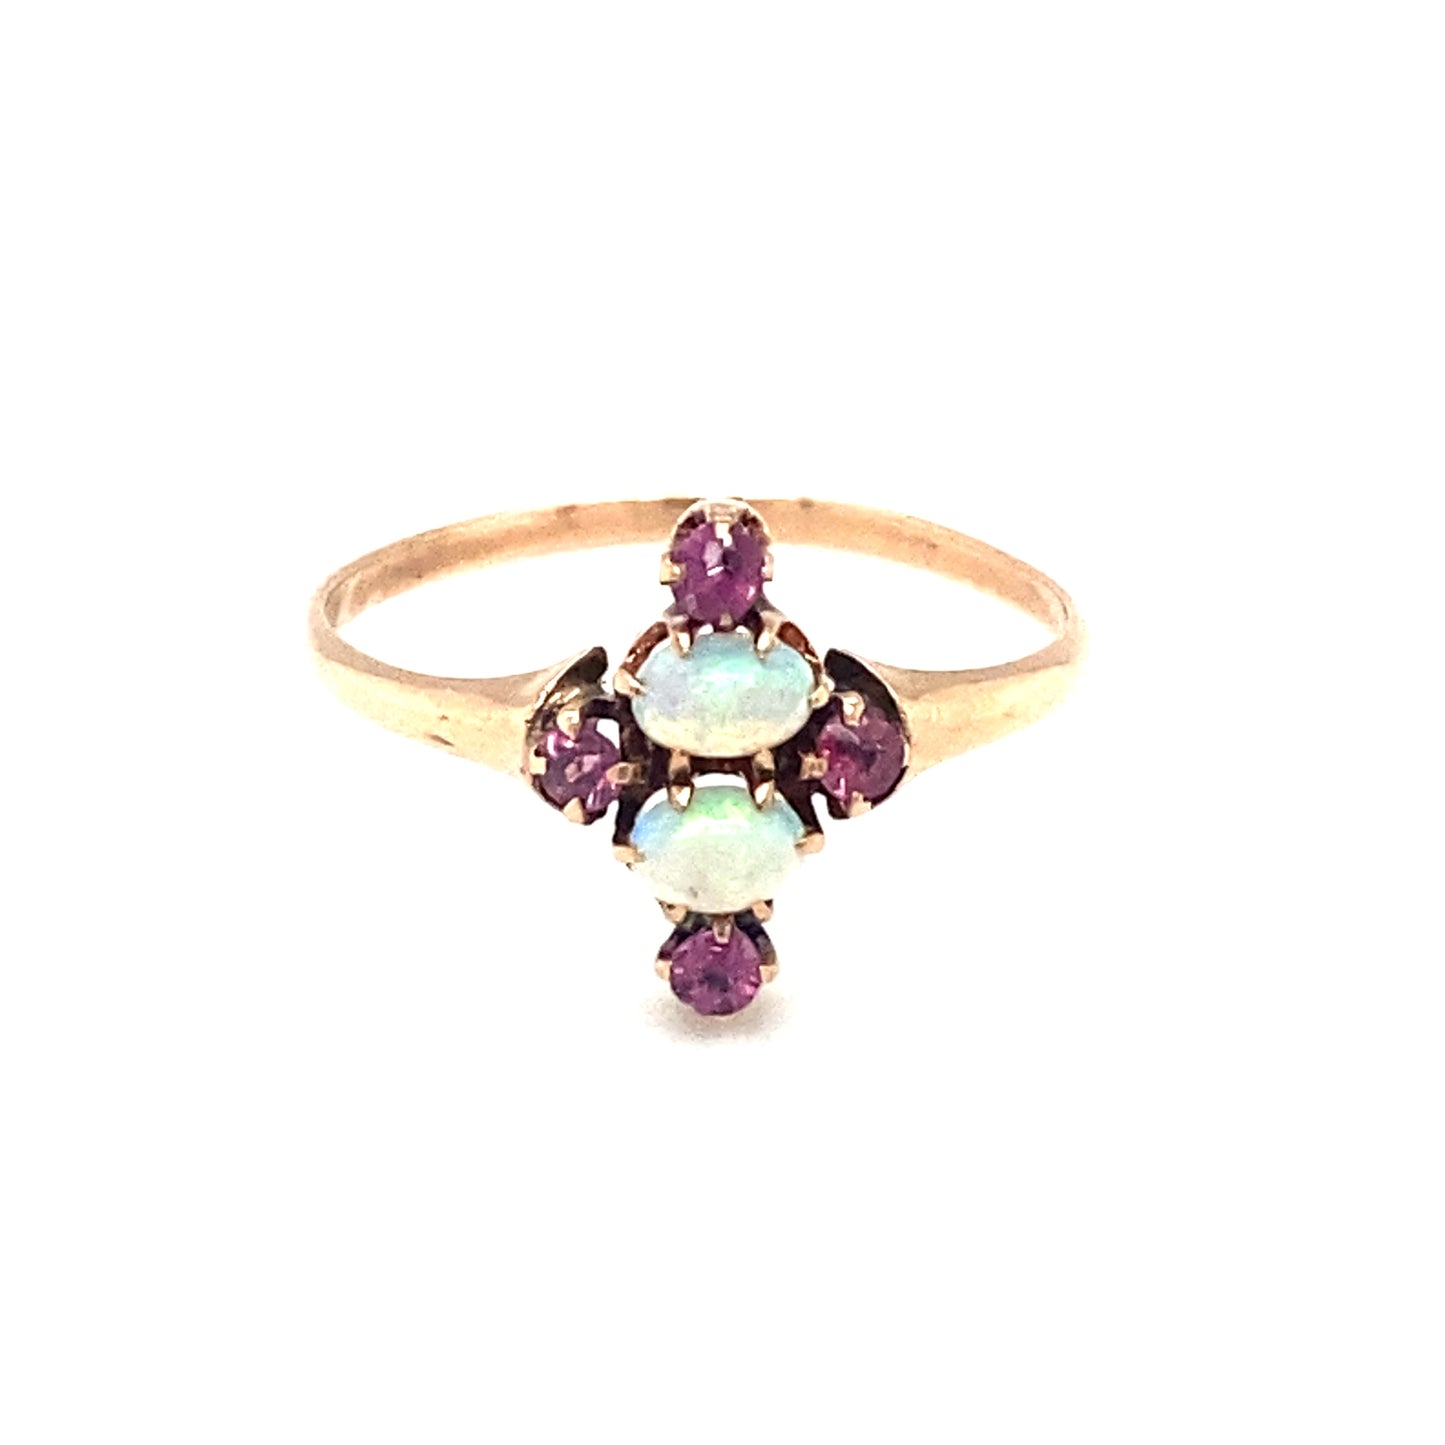 Circa 1890s Pink Sapphire and Ethiopian Opal Ring in 9K Gold